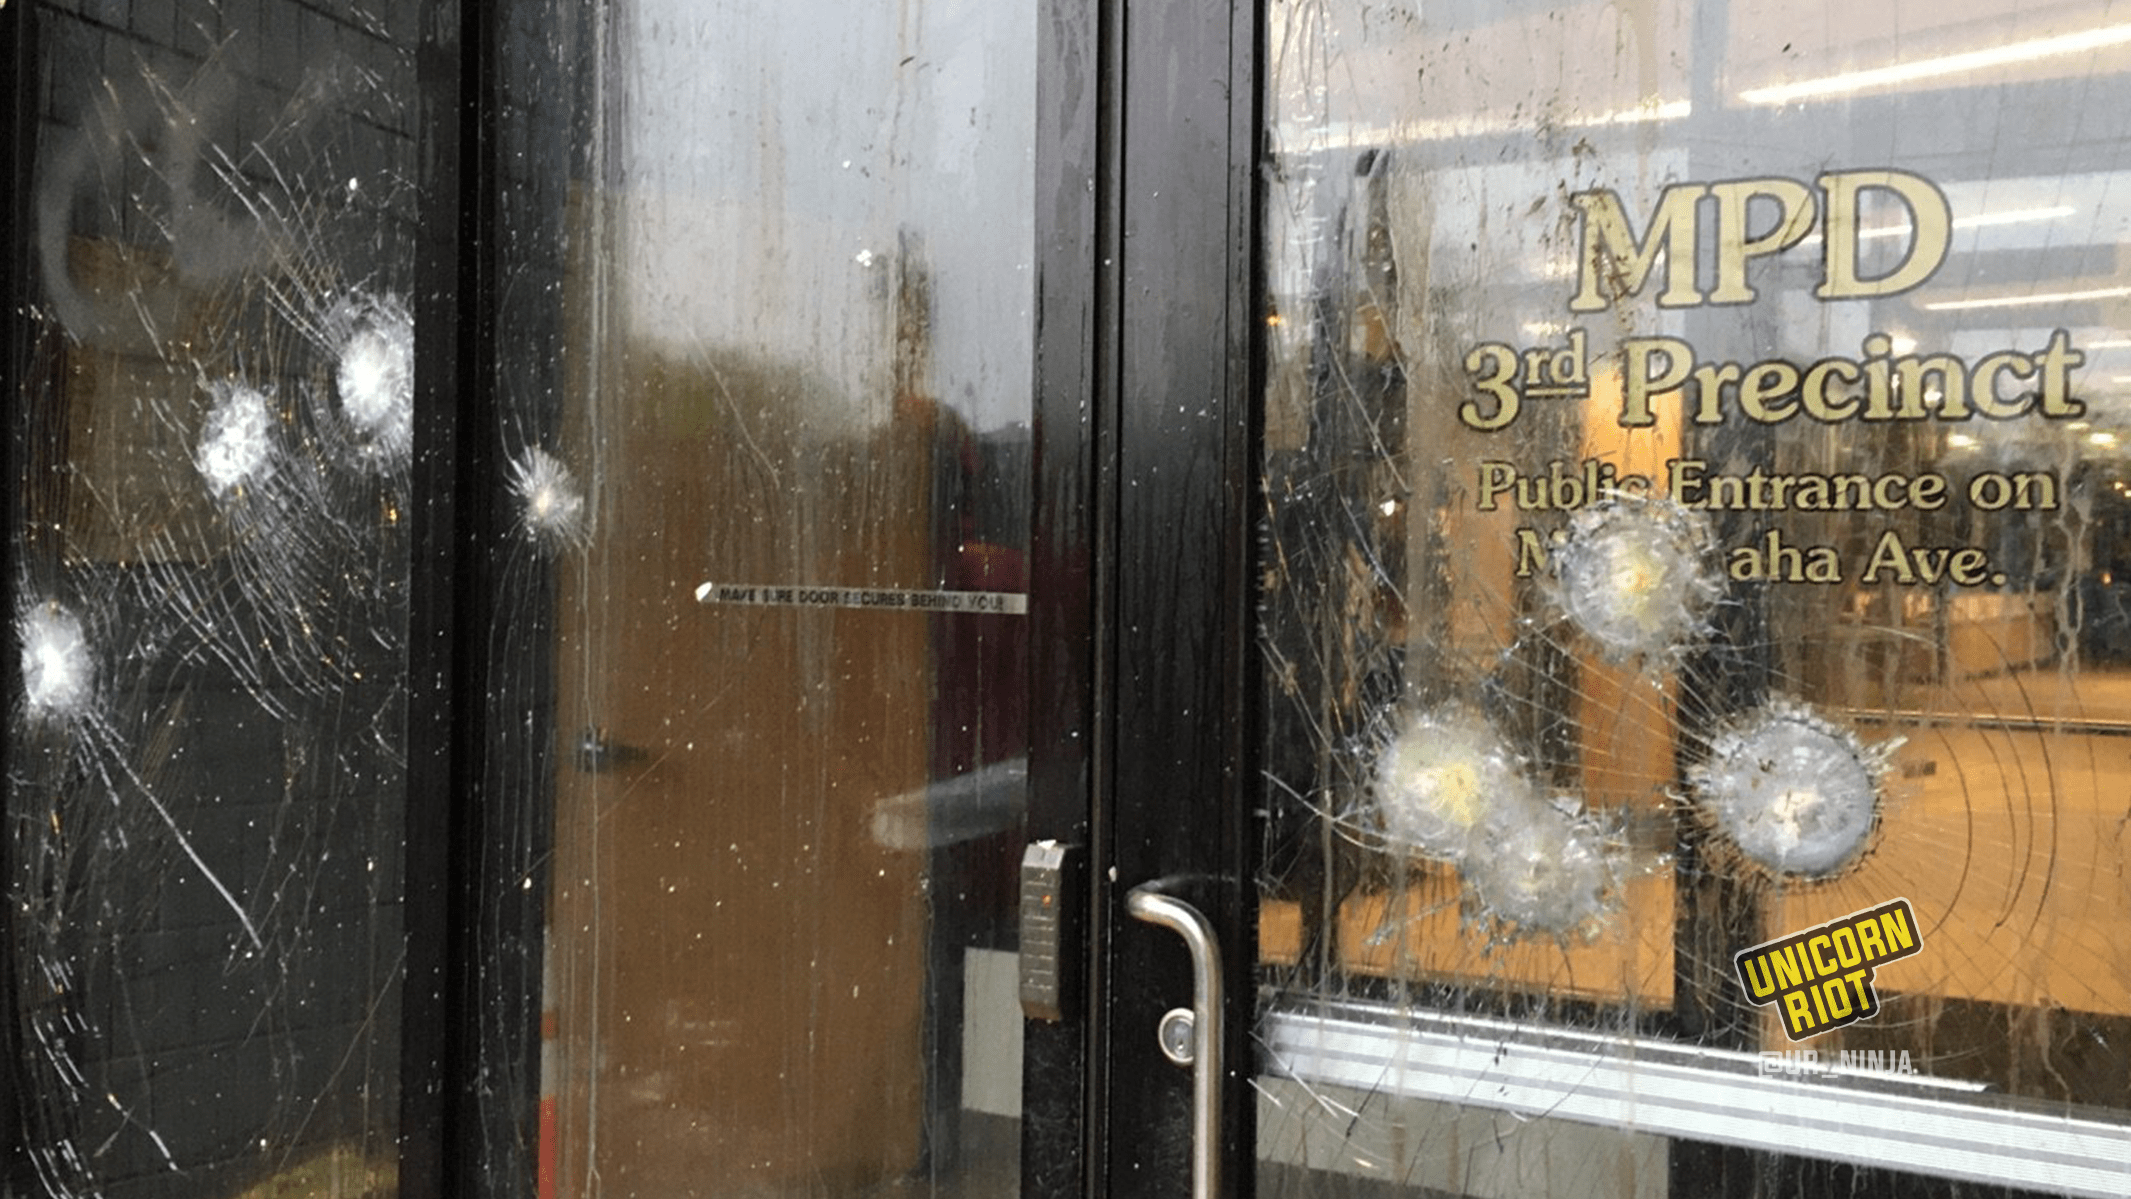 Image: the side entrance to the Minneapolis Police Department uses bullet-proof glass in the windows and door, which are each showing several fractures from having objects thrown at them from protesters. 'MPD 3rd Precinct, Public Entrance on Minnehaha Ave.' is written in gold stencils on the door.